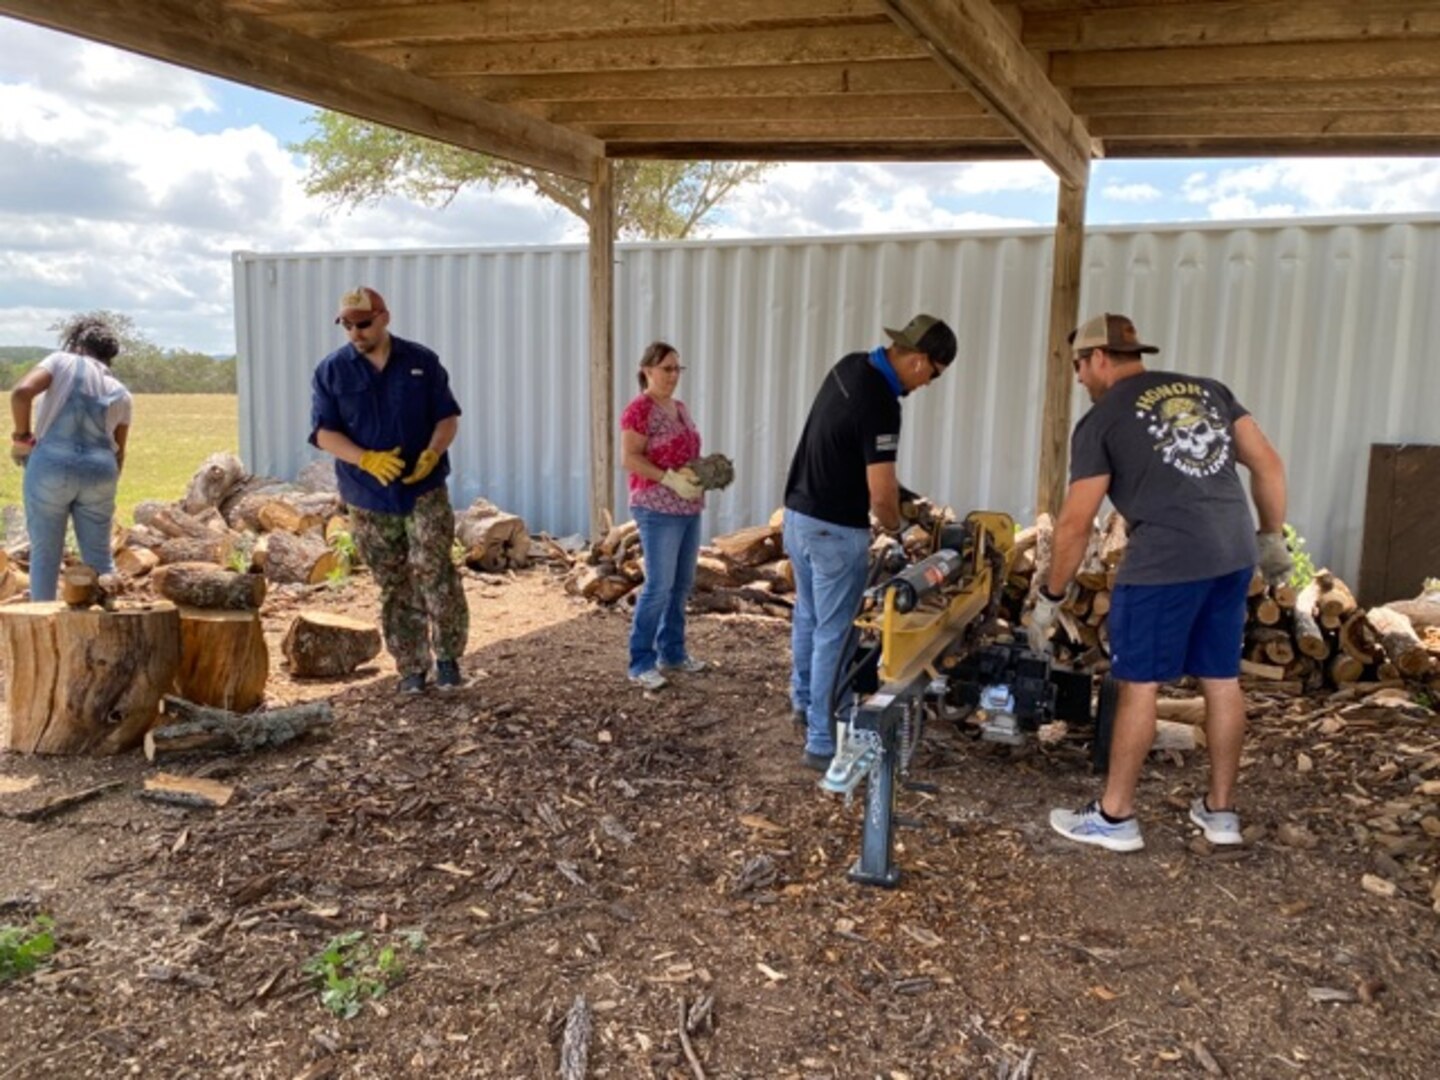 960th Cyberspace Wing Reserve Citizen Airmen chop and stack firewood May 31, 2022, at the Warriors Heart Treatment Center in Bandera, Texas.